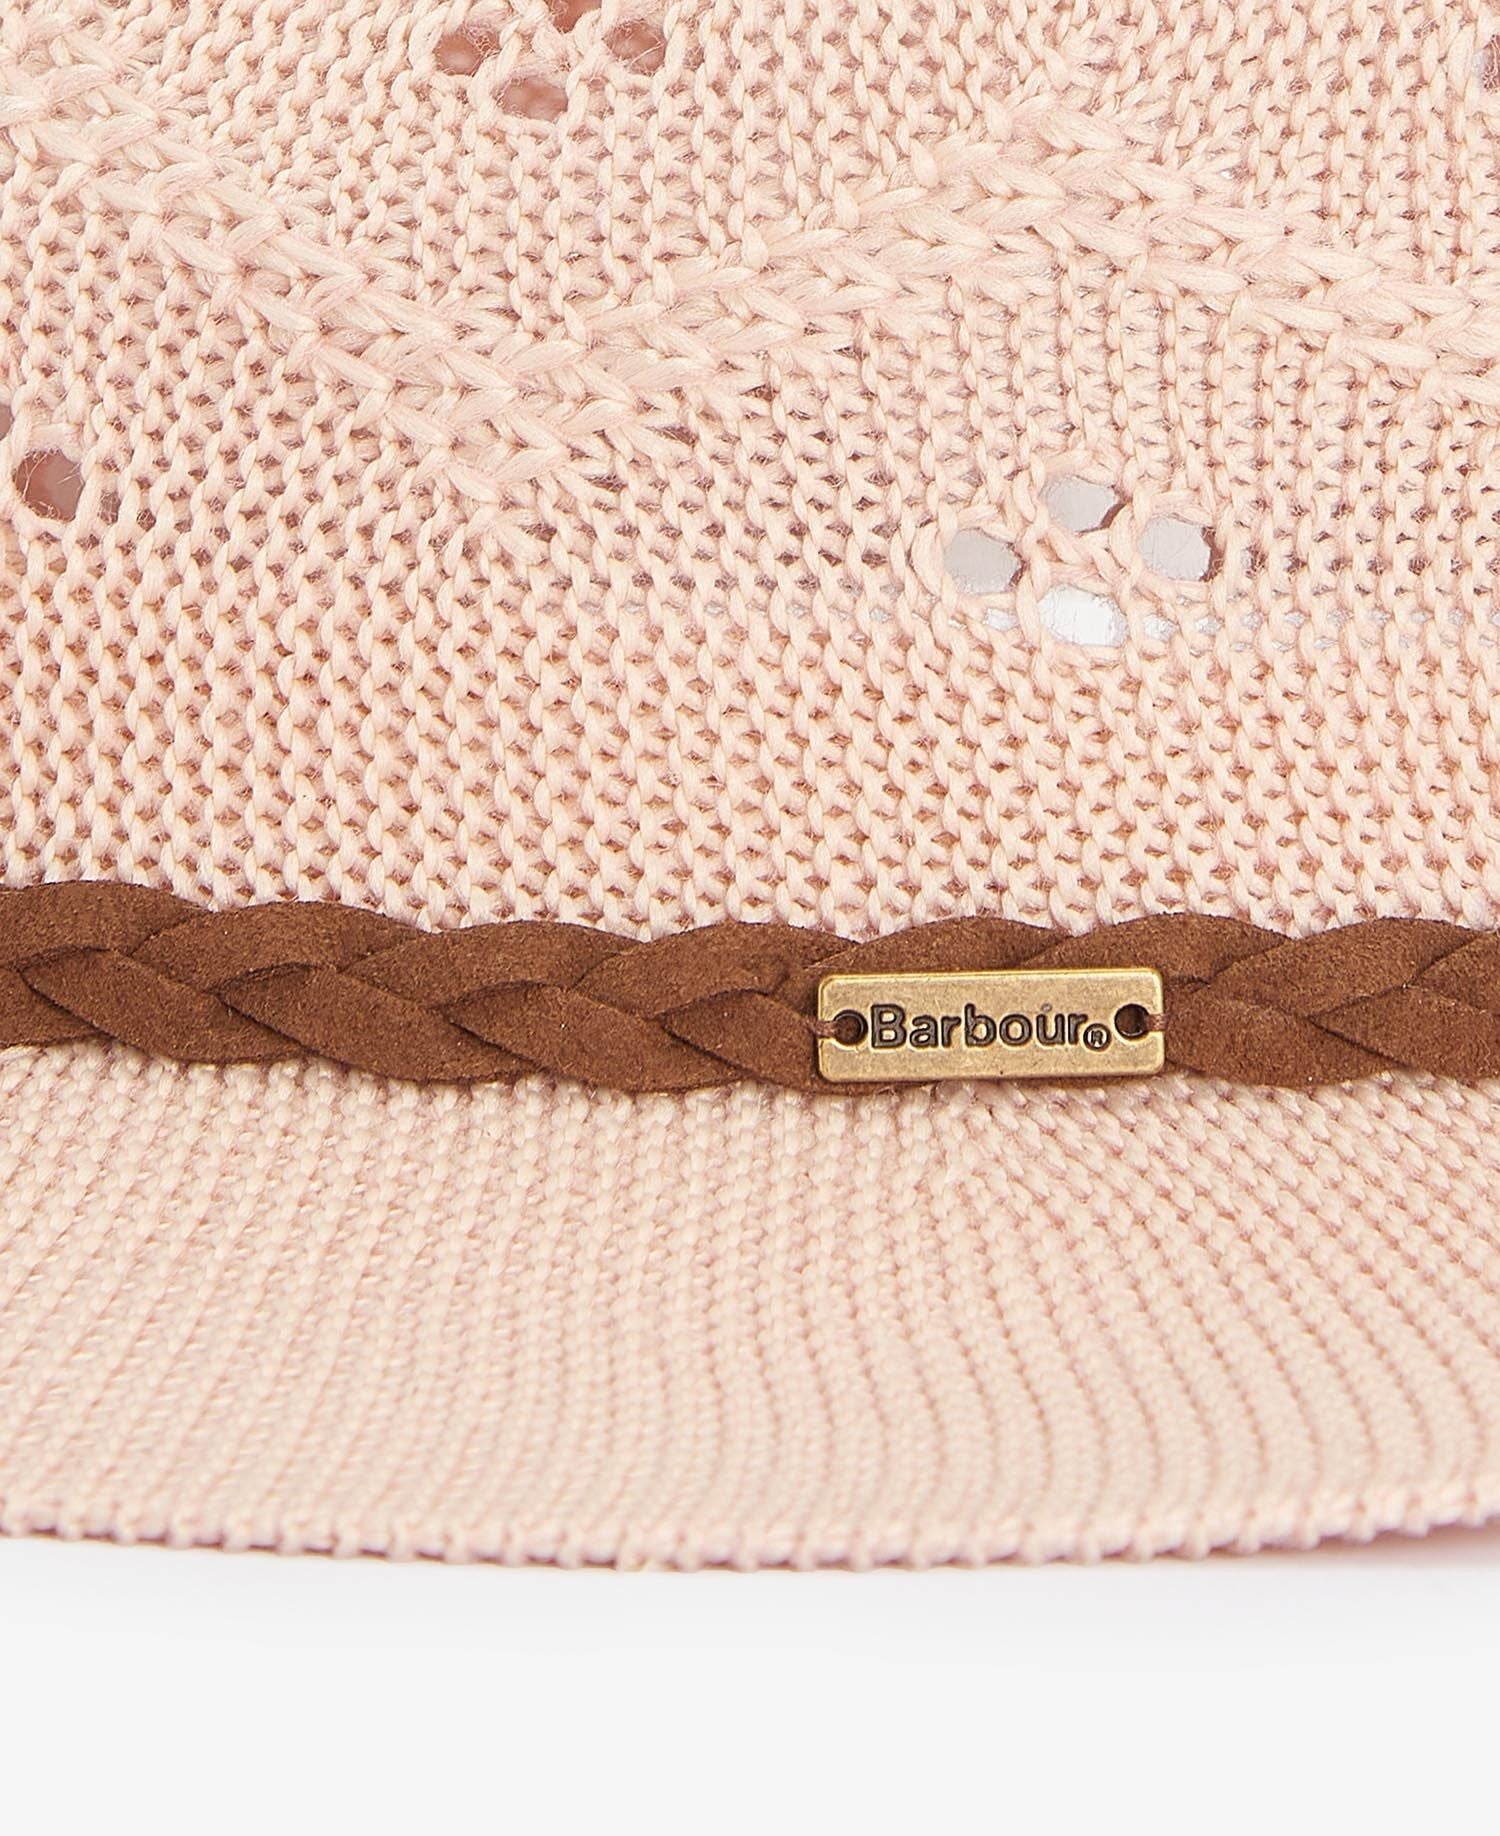 Barbour Flowerdale Trilby Pink